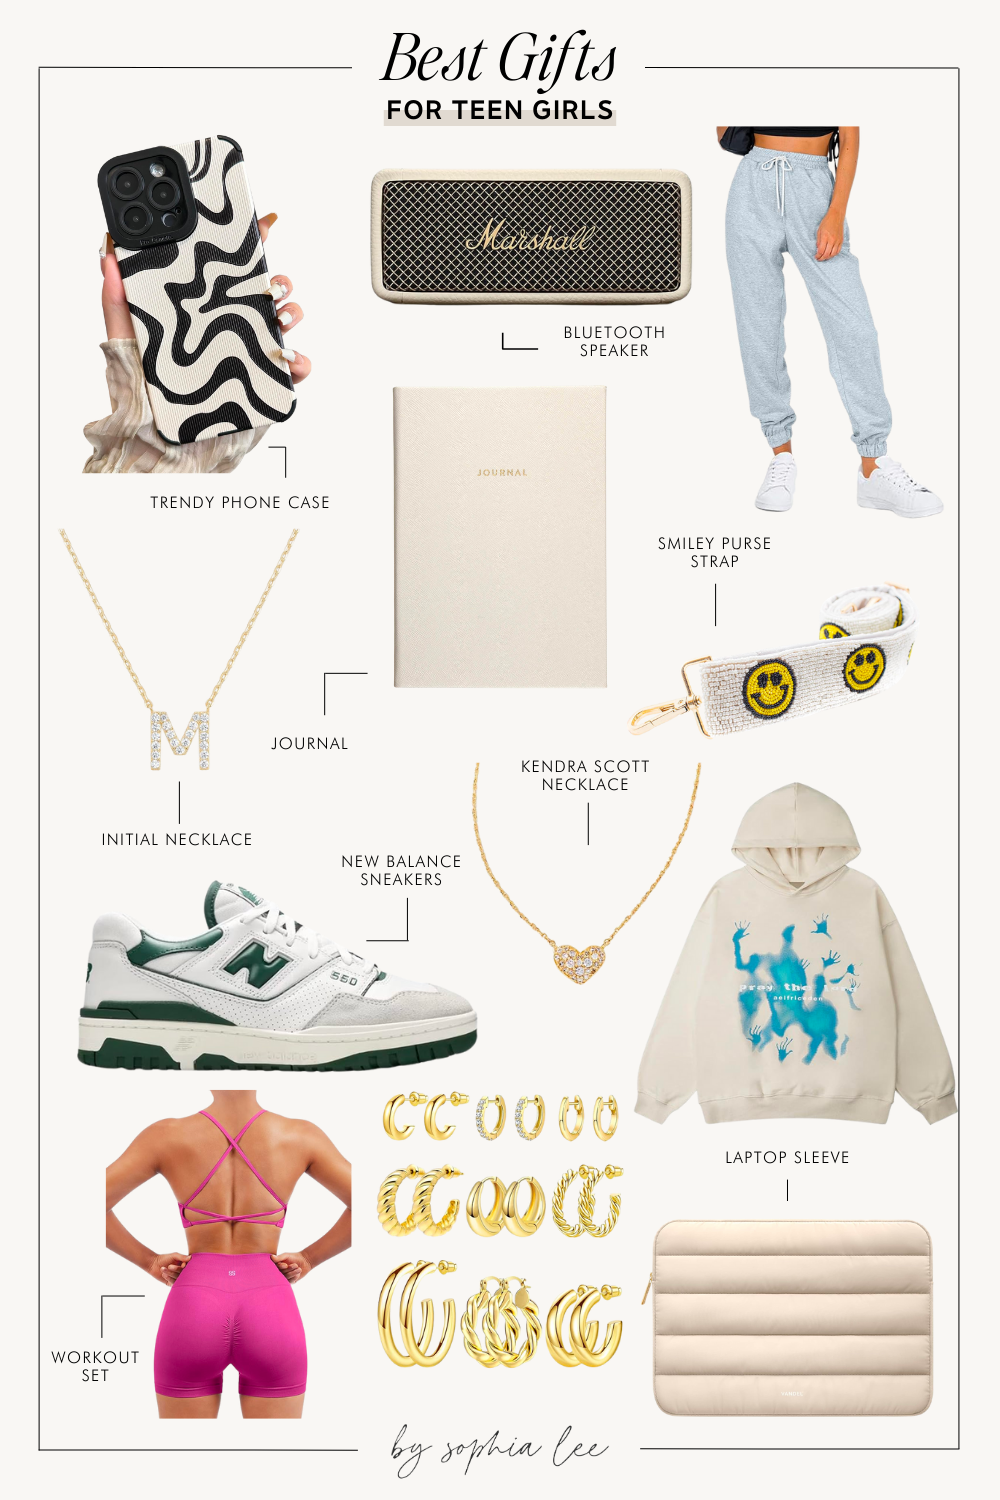 22 Gifts For Teenage Girls That They Actually Want - By Sophia Lee